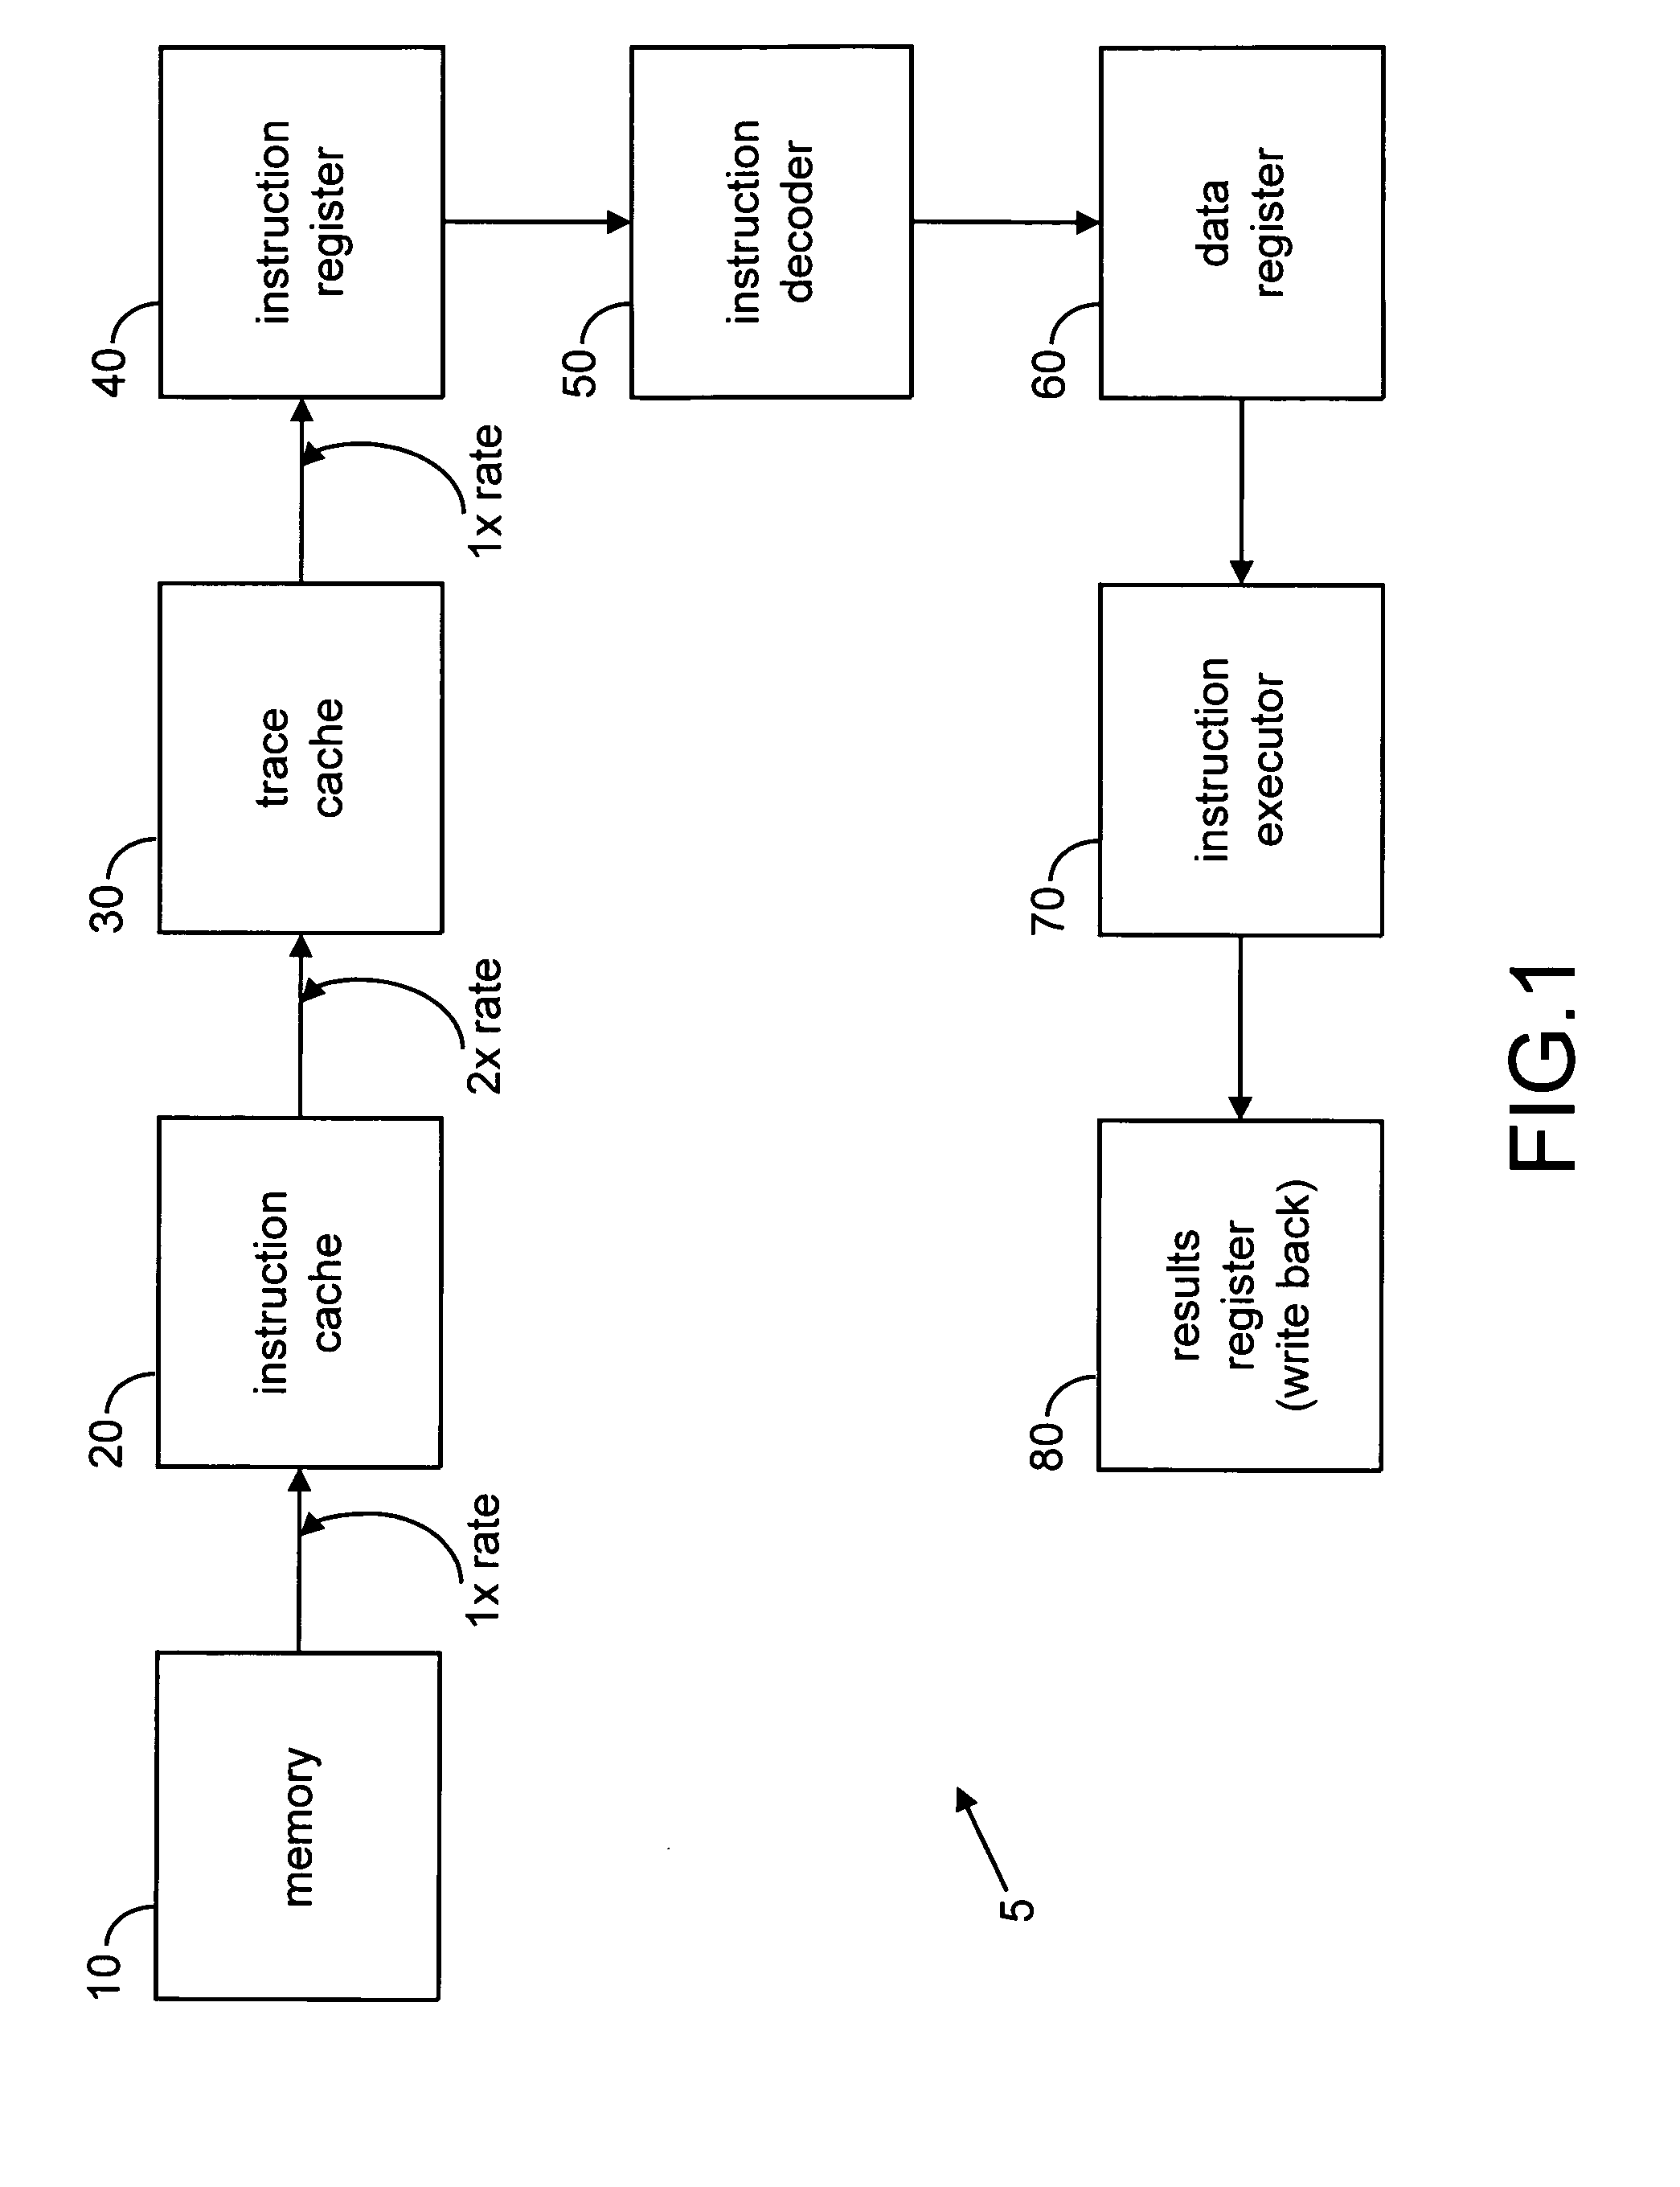 Implementation of an efficient instruction fetch pipeline utilizing a trace cache